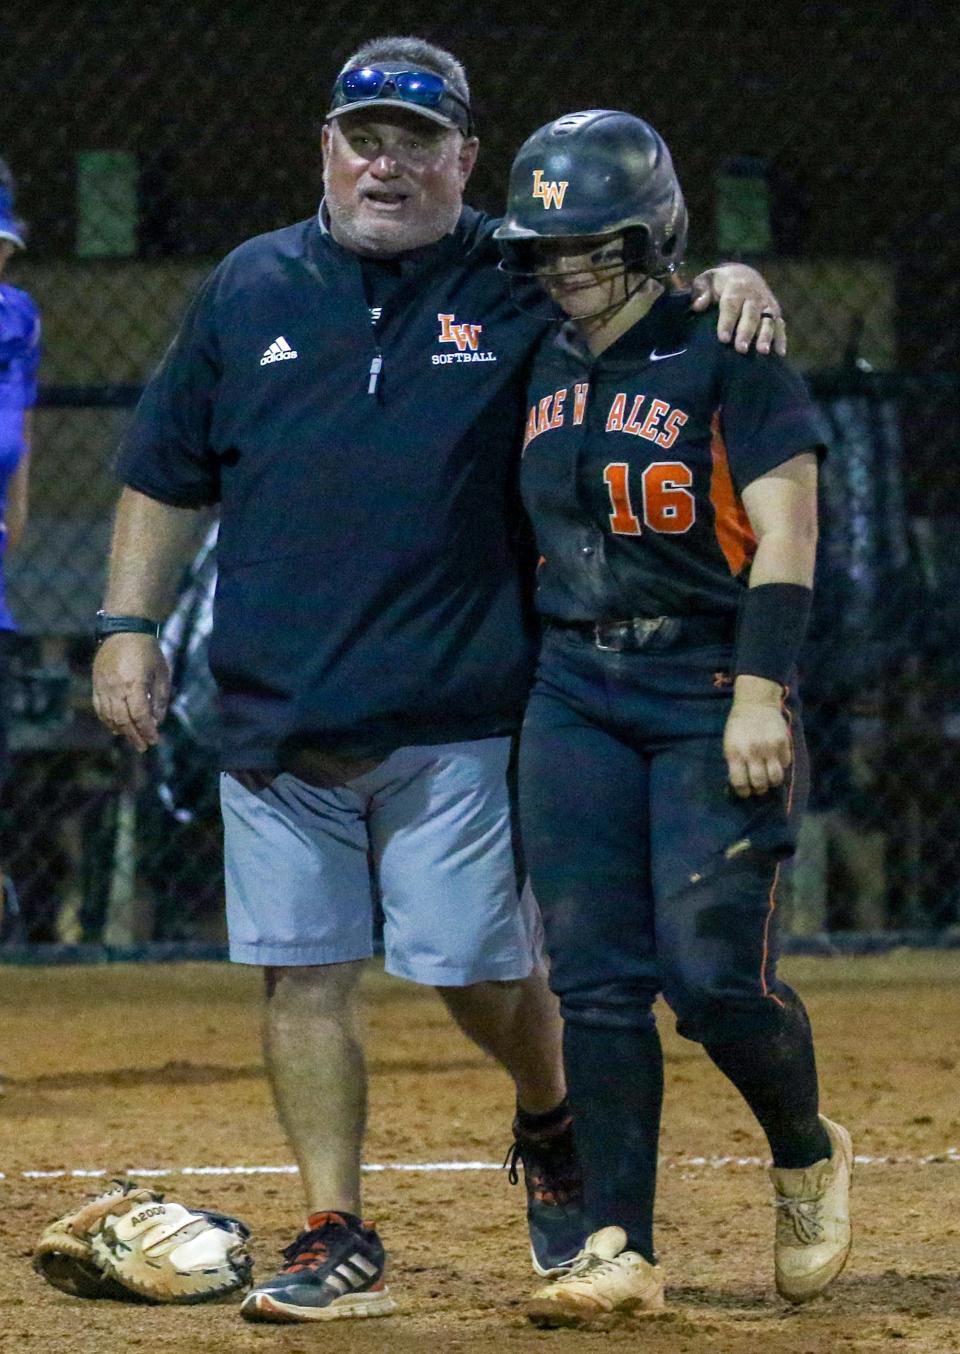 Lake Wales coach Mike Settle consoles third baseman Lydia Denton after the final out against Deltona in the Class 4A state championshipp softball game at Legends Way Ballfields in Clermonty.